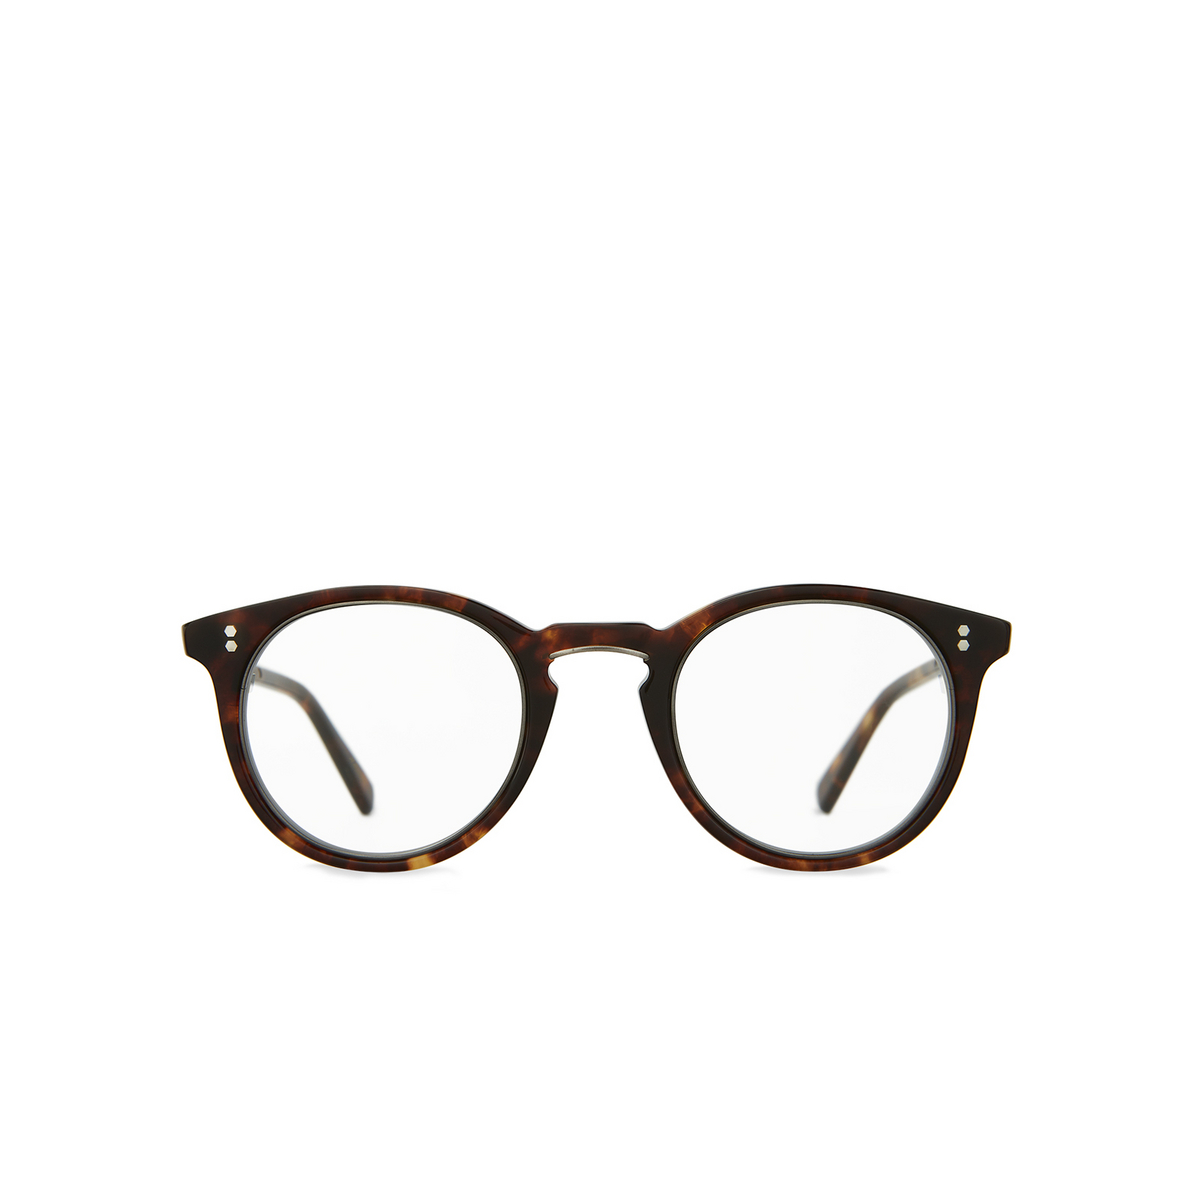 Mr. Leight® Round Eyeglasses: Crosby C color Maple - Antique Gold Mpl-antplt - front view.